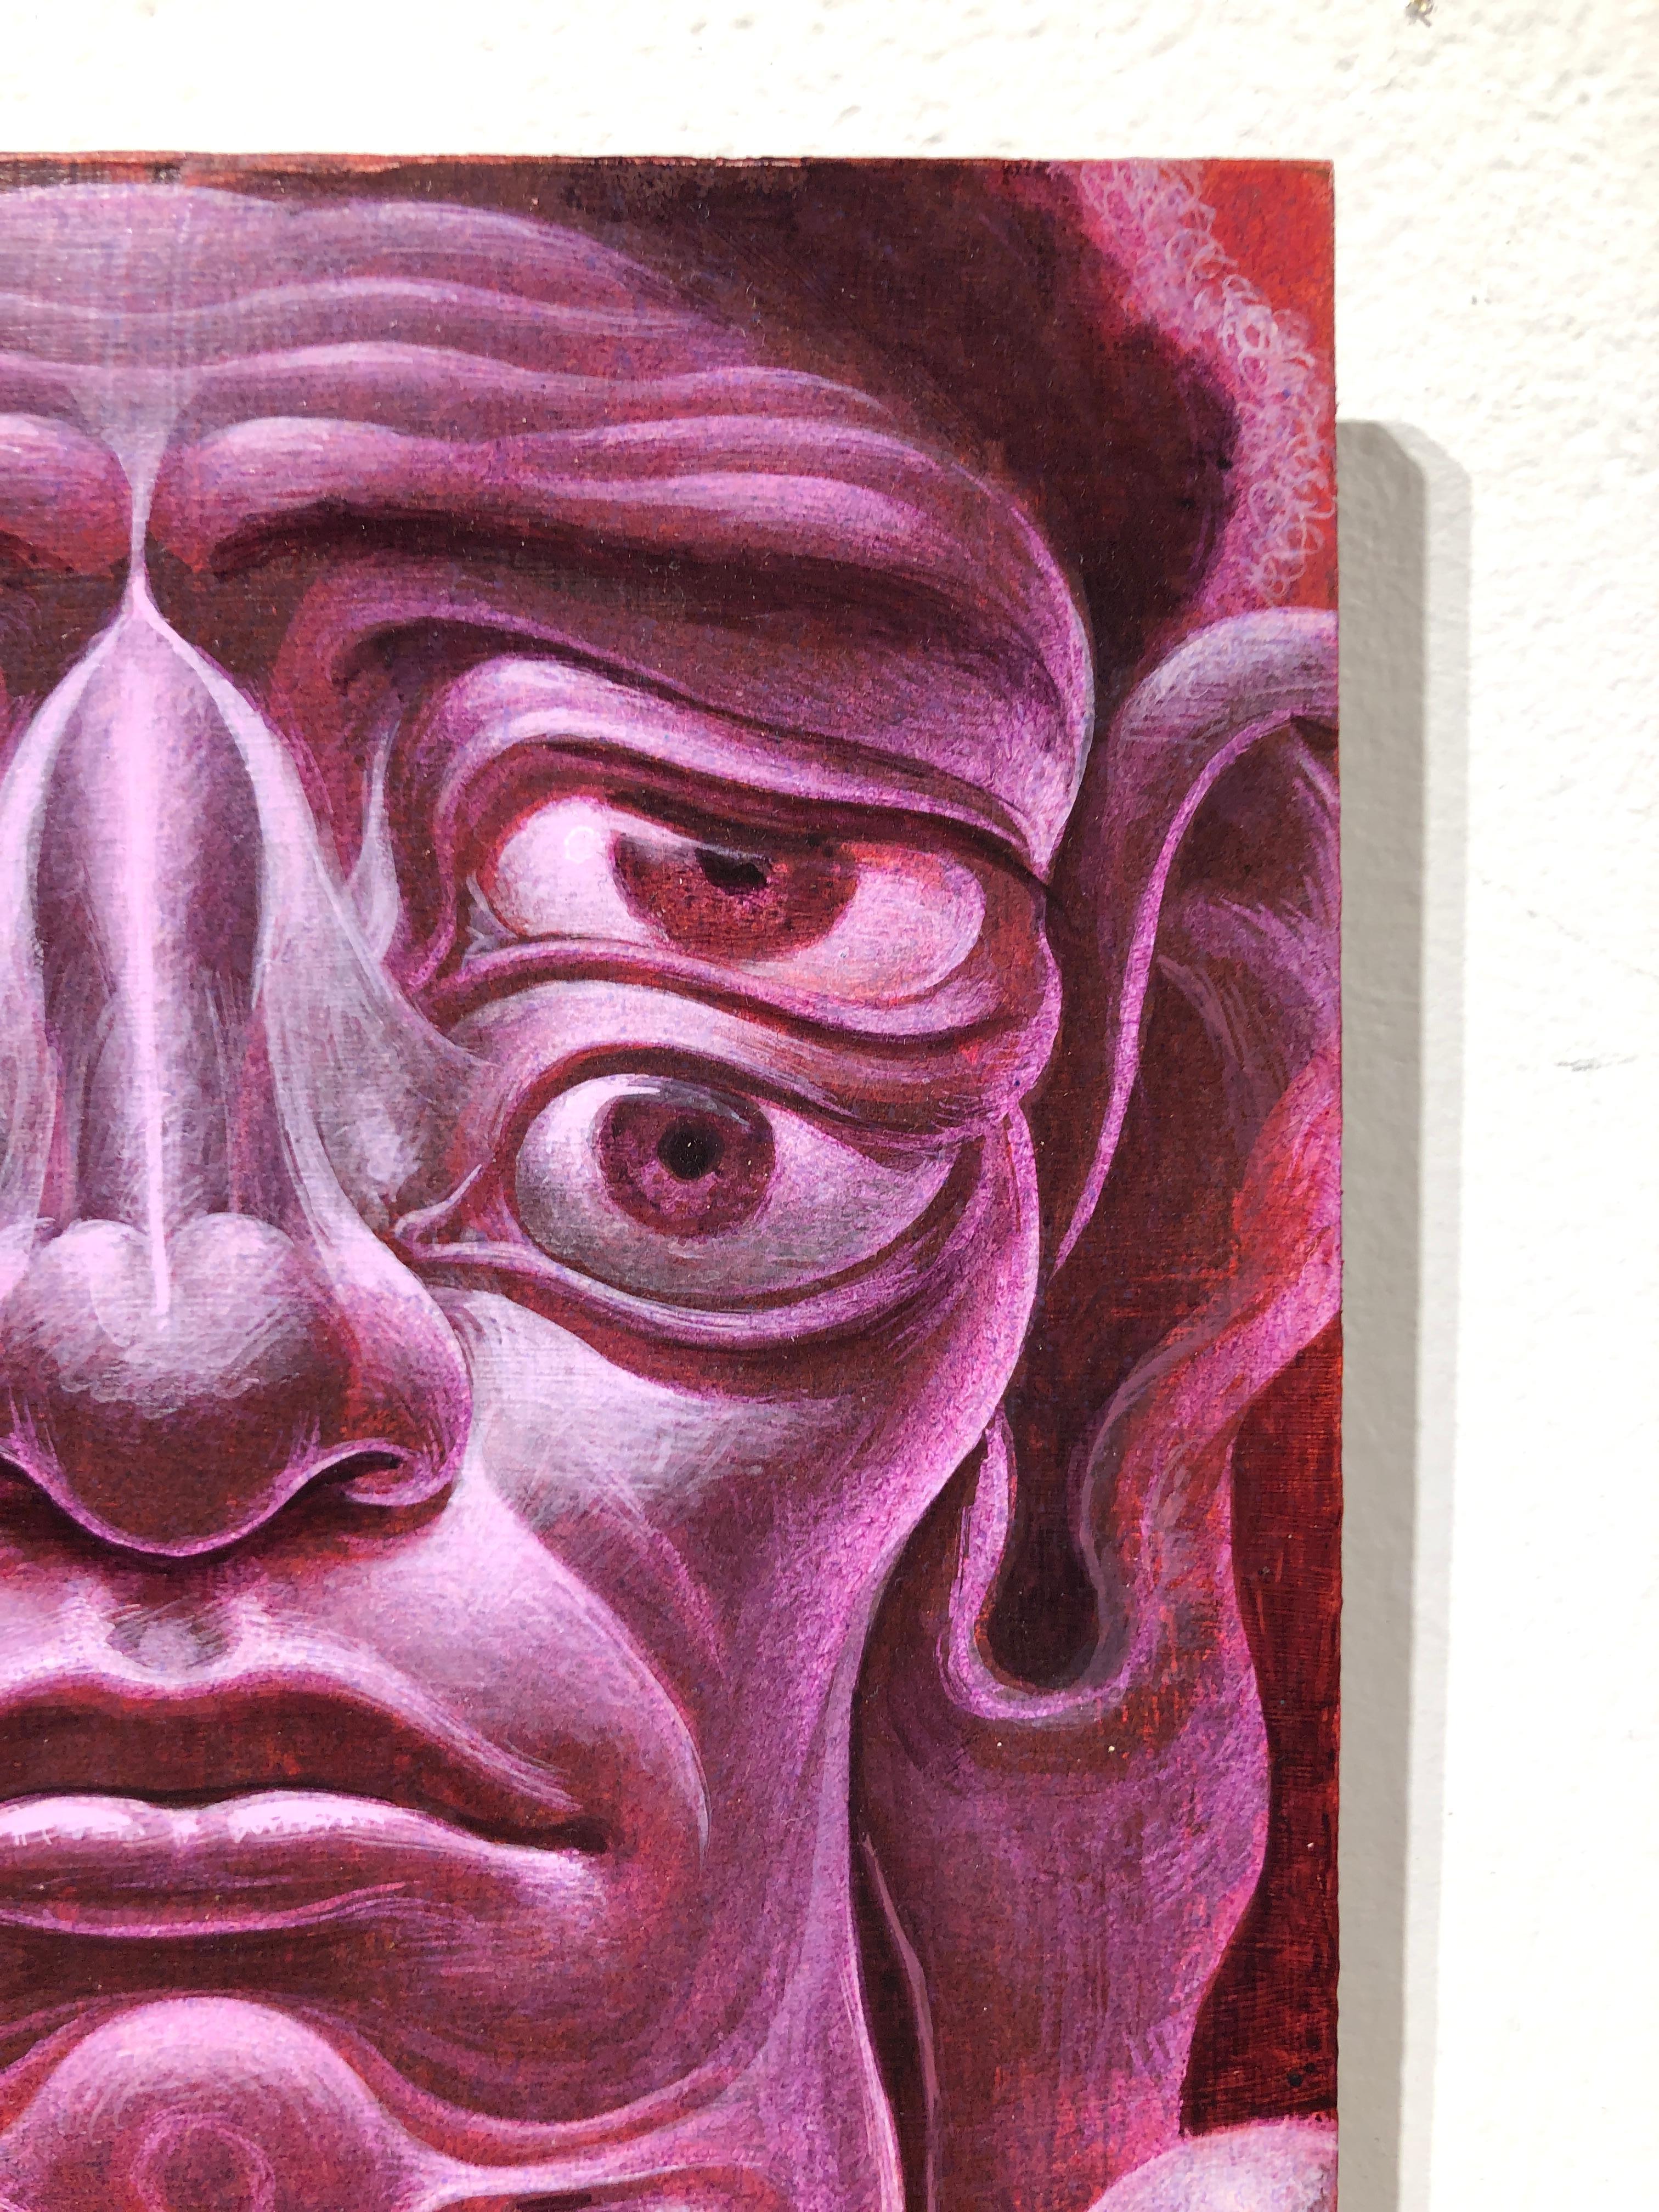 Totemic Arhat - Surreal Buddhist Figure of Enlightenment, Acrylic on Panel - Surrealist Painting by Oliver Hazard Benson